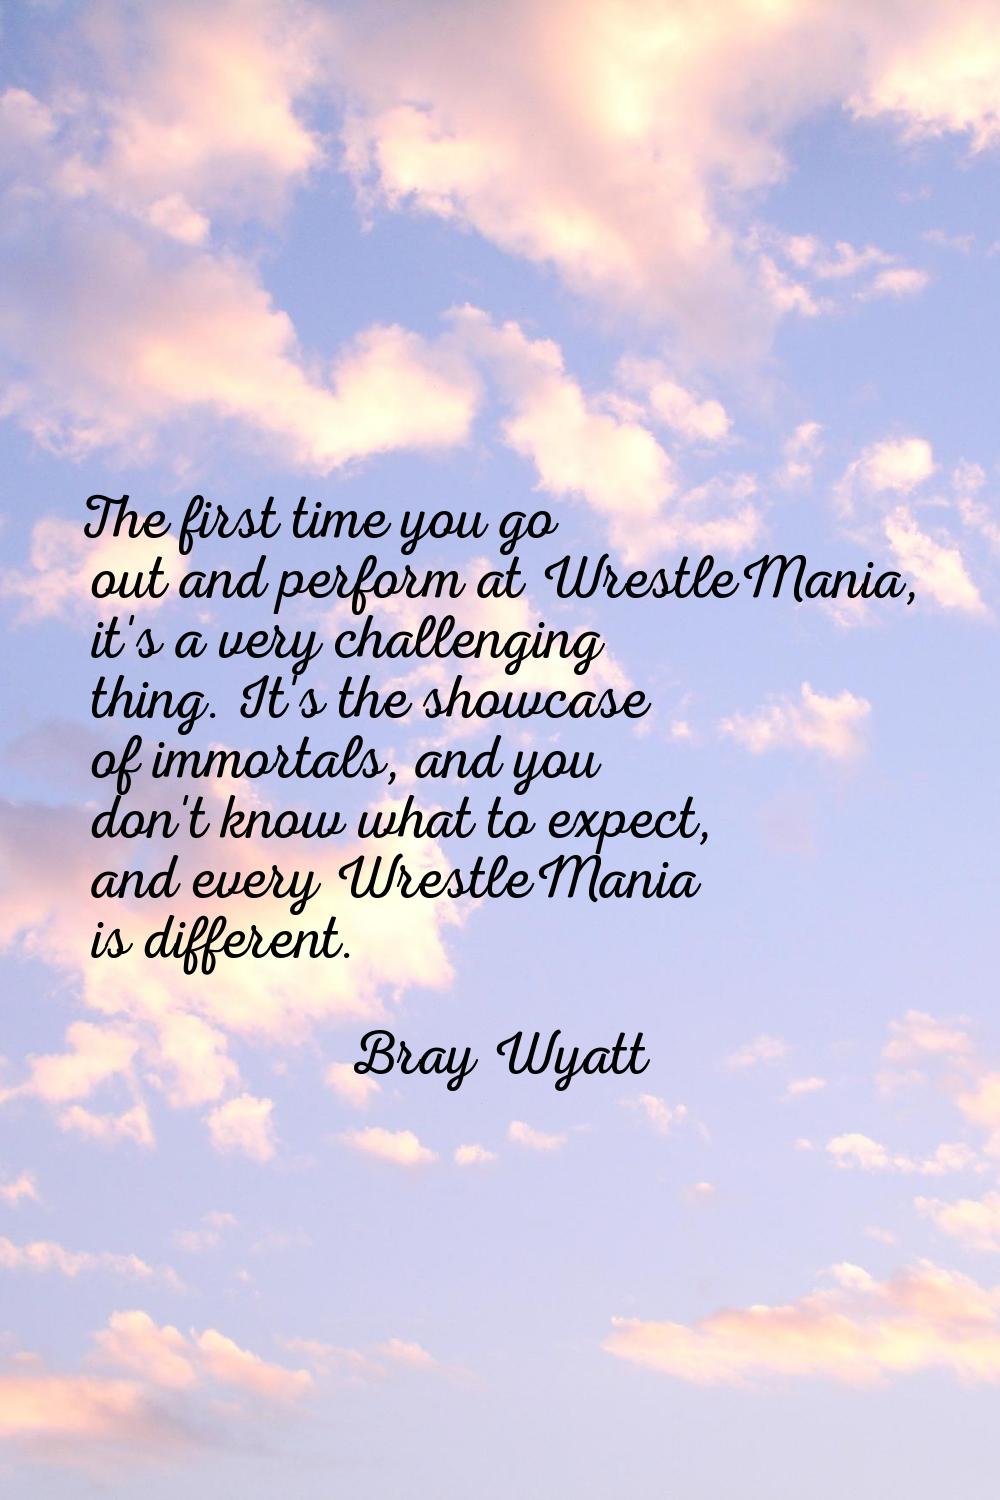 The first time you go out and perform at WrestleMania, it's a very challenging thing. It's the show